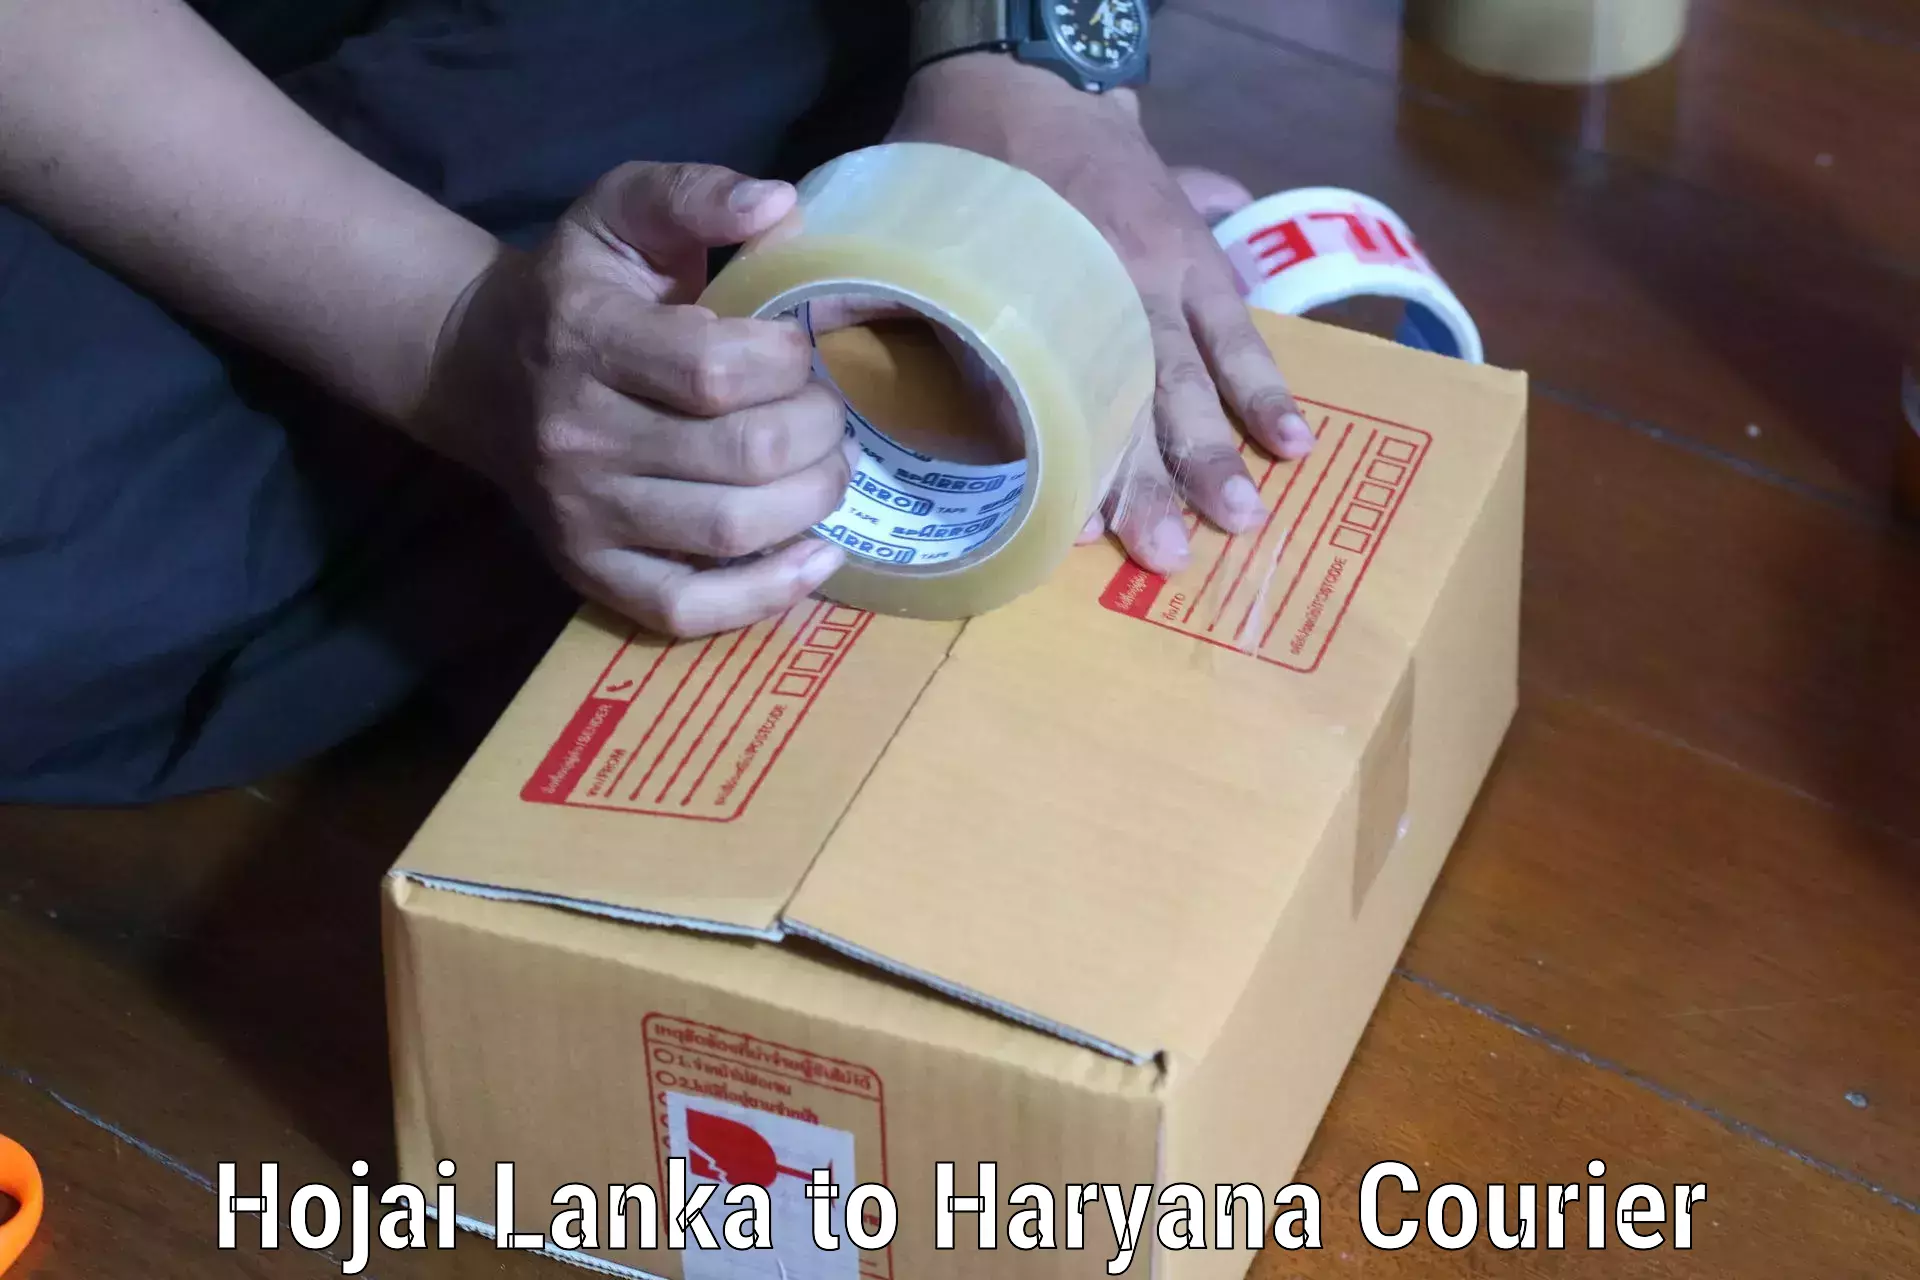 Large-scale shipping solutions Hojai Lanka to Sonipat